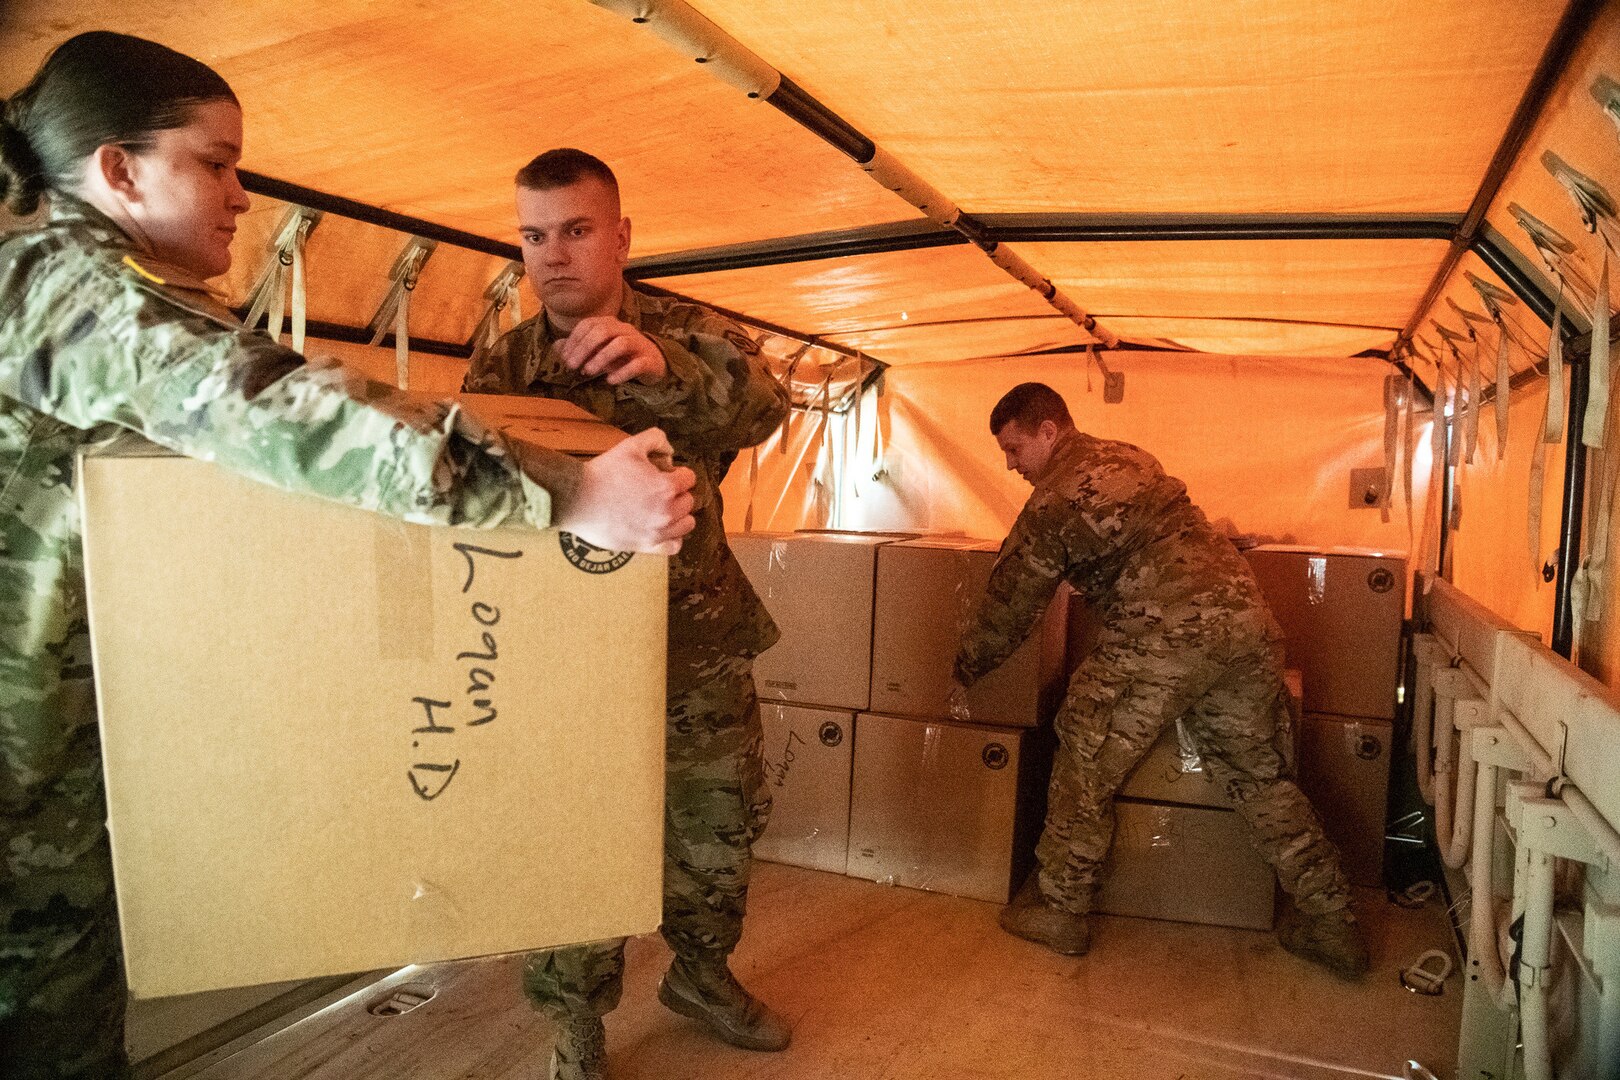 Members of the West Virginia National Guard help process and deliver medical supplies to hospitals, clinics and local health departments throughout West Virginia in COVID-19 pandemic response efforts, March 24, 2020, in Poca, West Virginia. Workers packaged surgical masks, respirators, sterile gowns and gloves for delivery around the state.